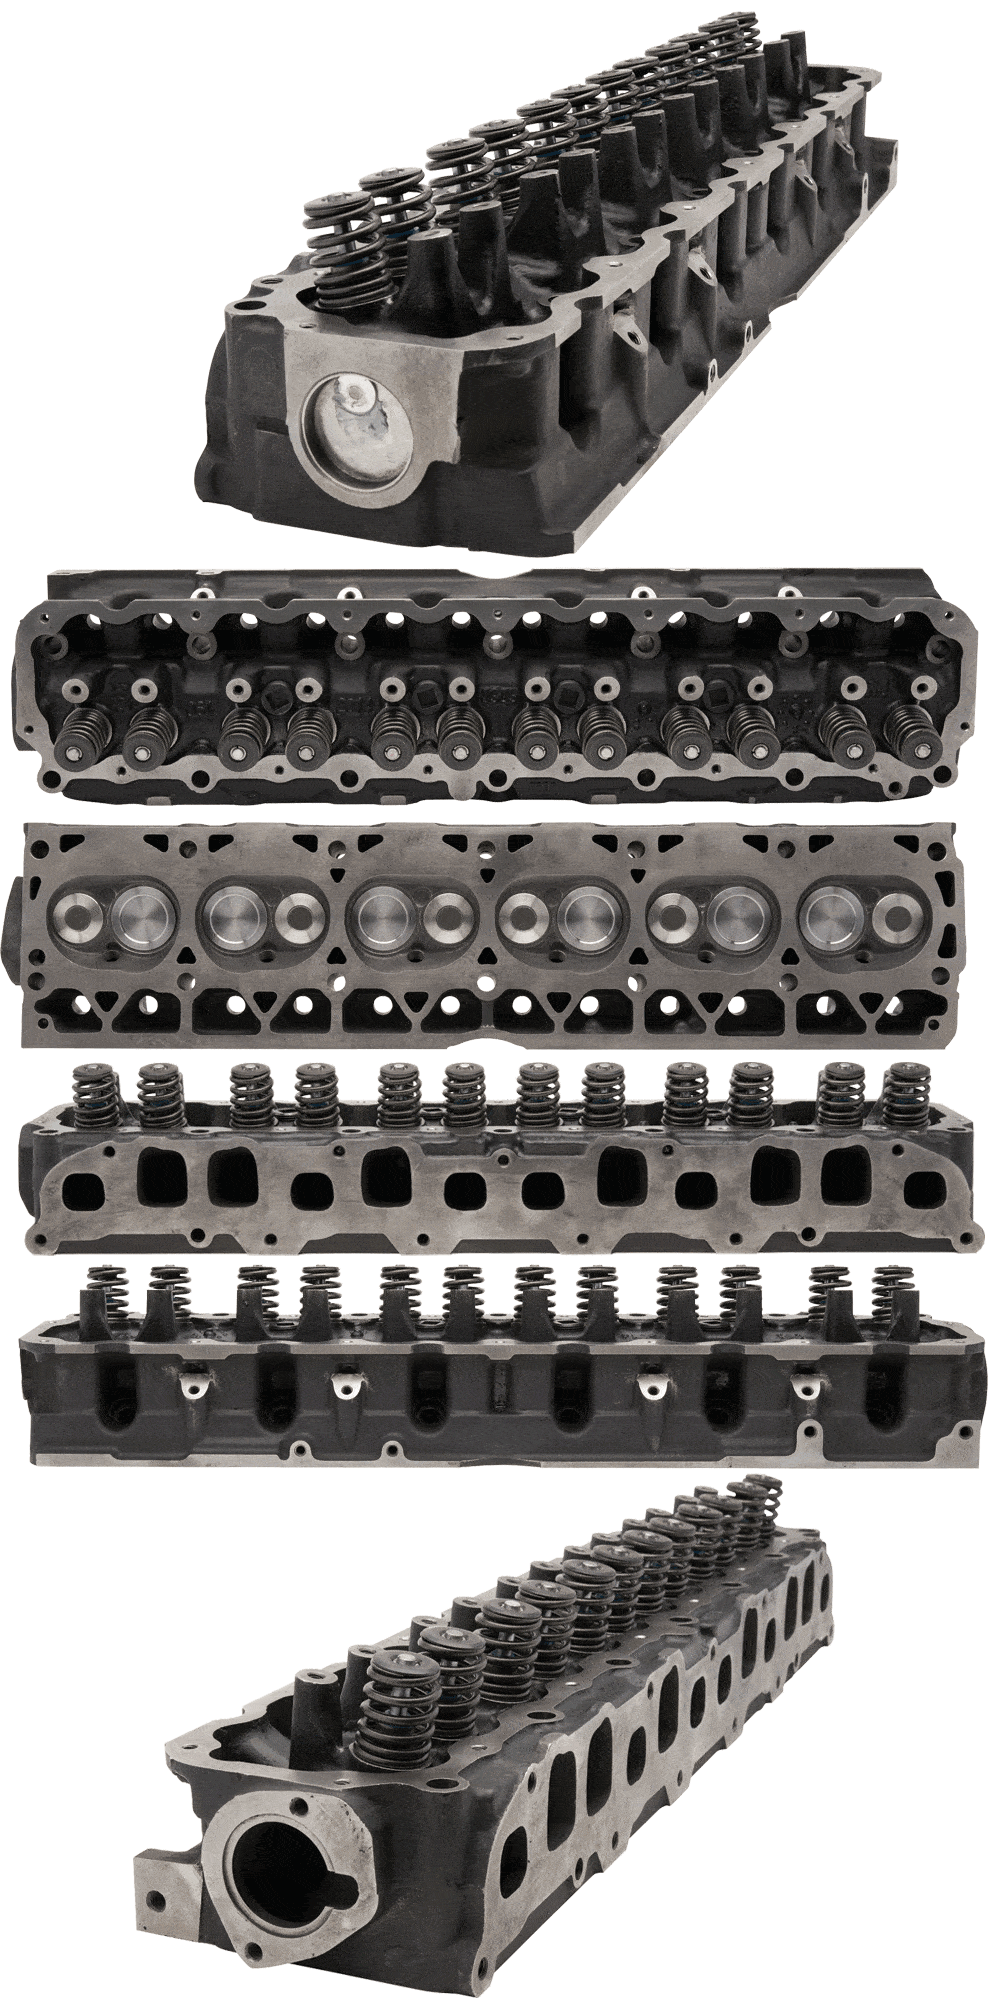 Jeep/AMC 4.0 LS Converted Competition Cylinder Head.